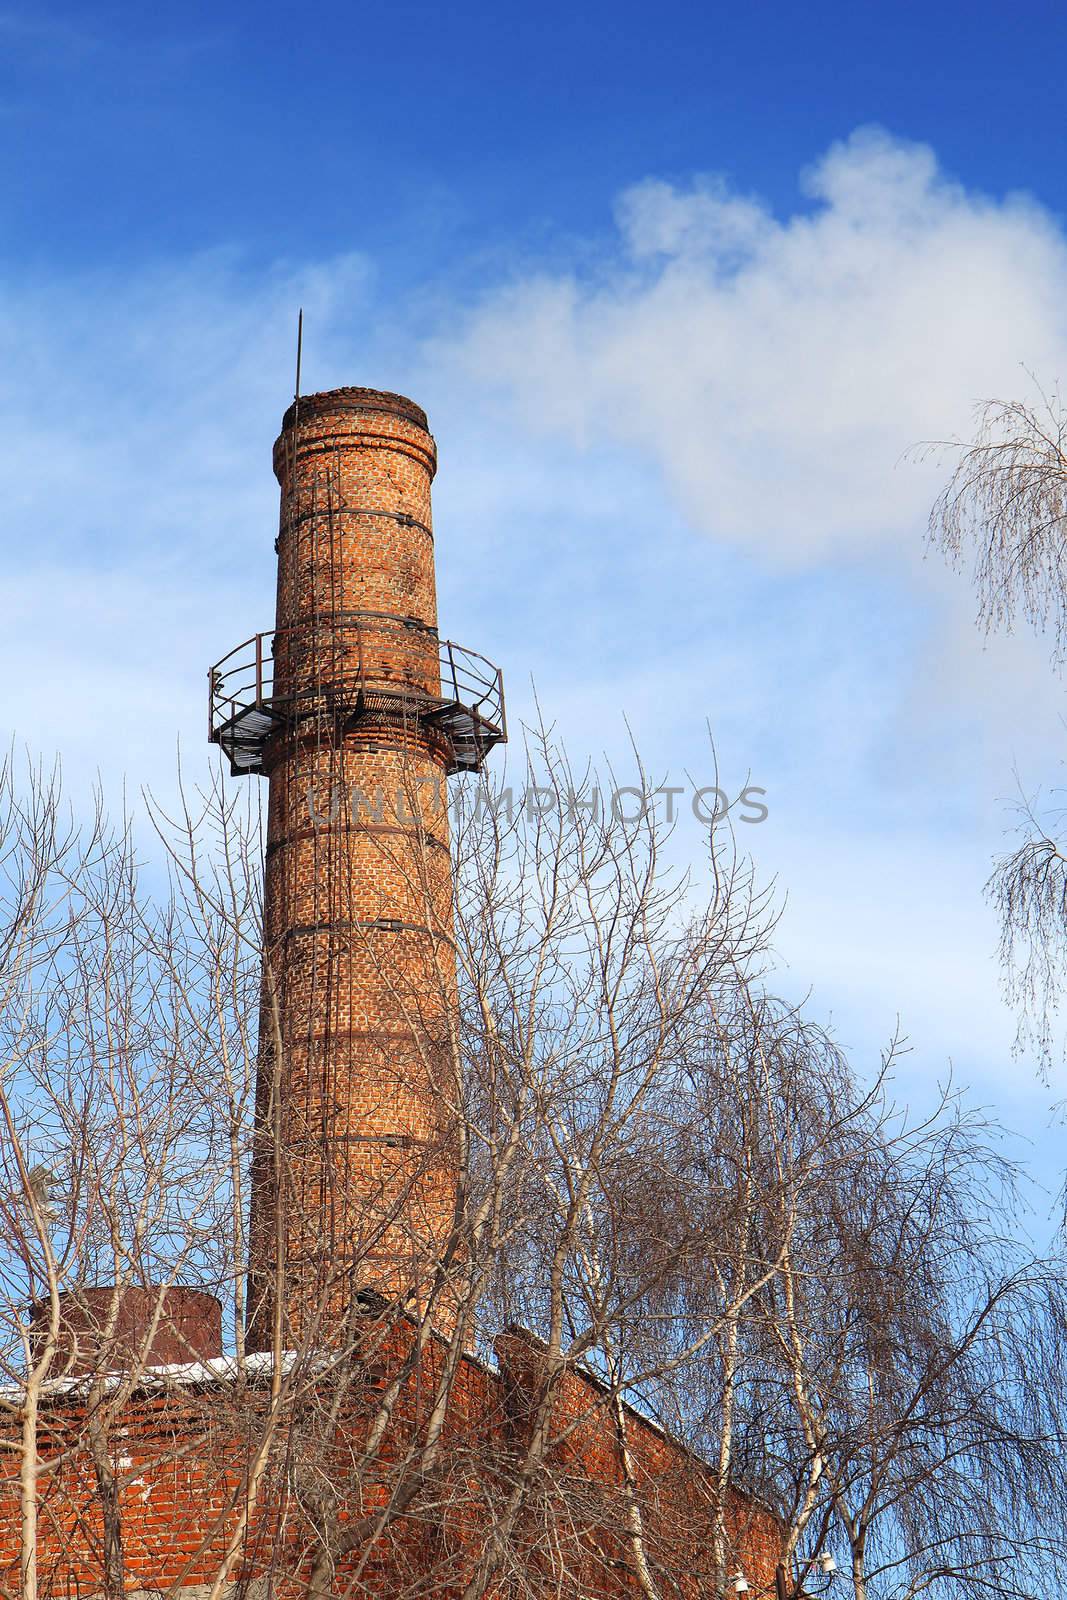 Smoking pipes of thermal power plant against blue sky
